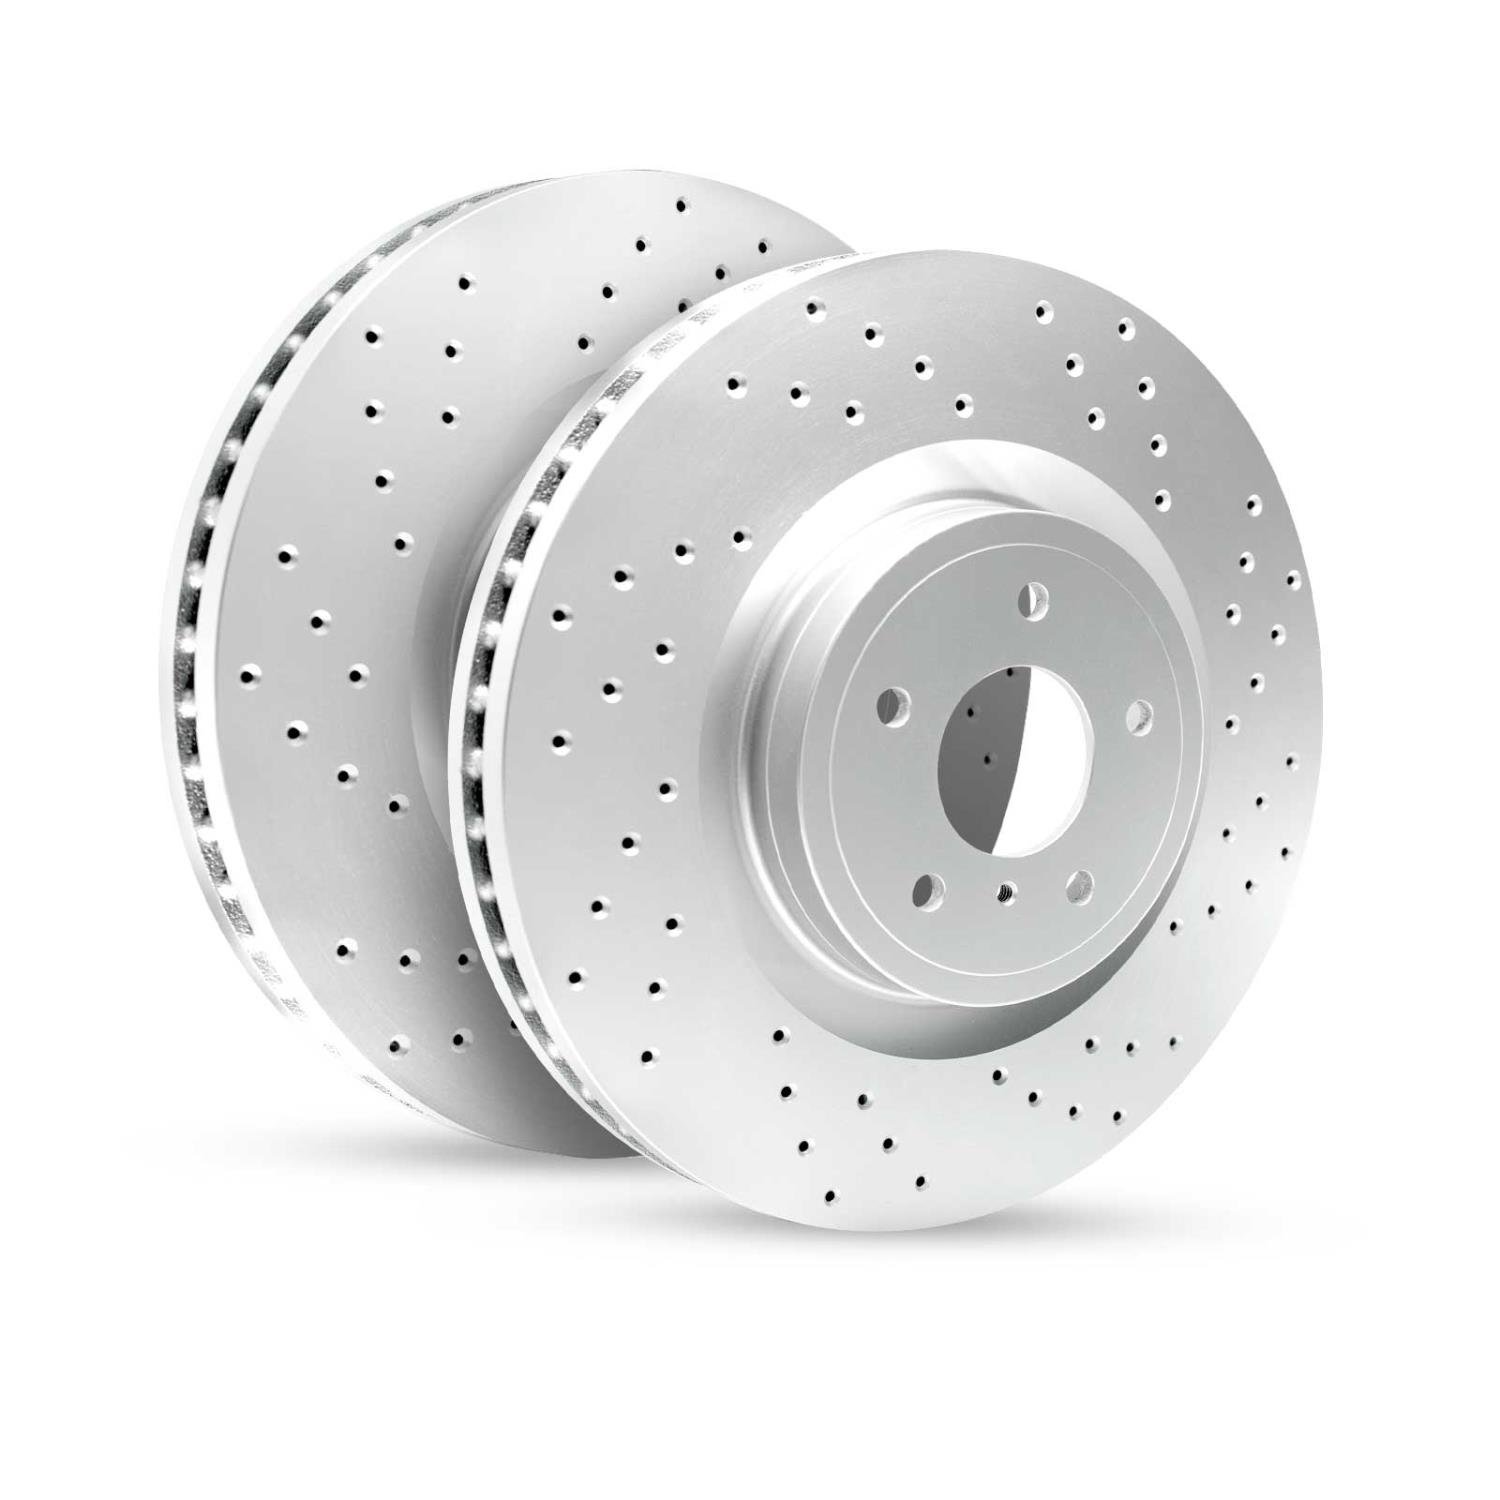 GEO-Carbon Drilled/Slotted Rotors, Fits Select Mercedes-Benz,